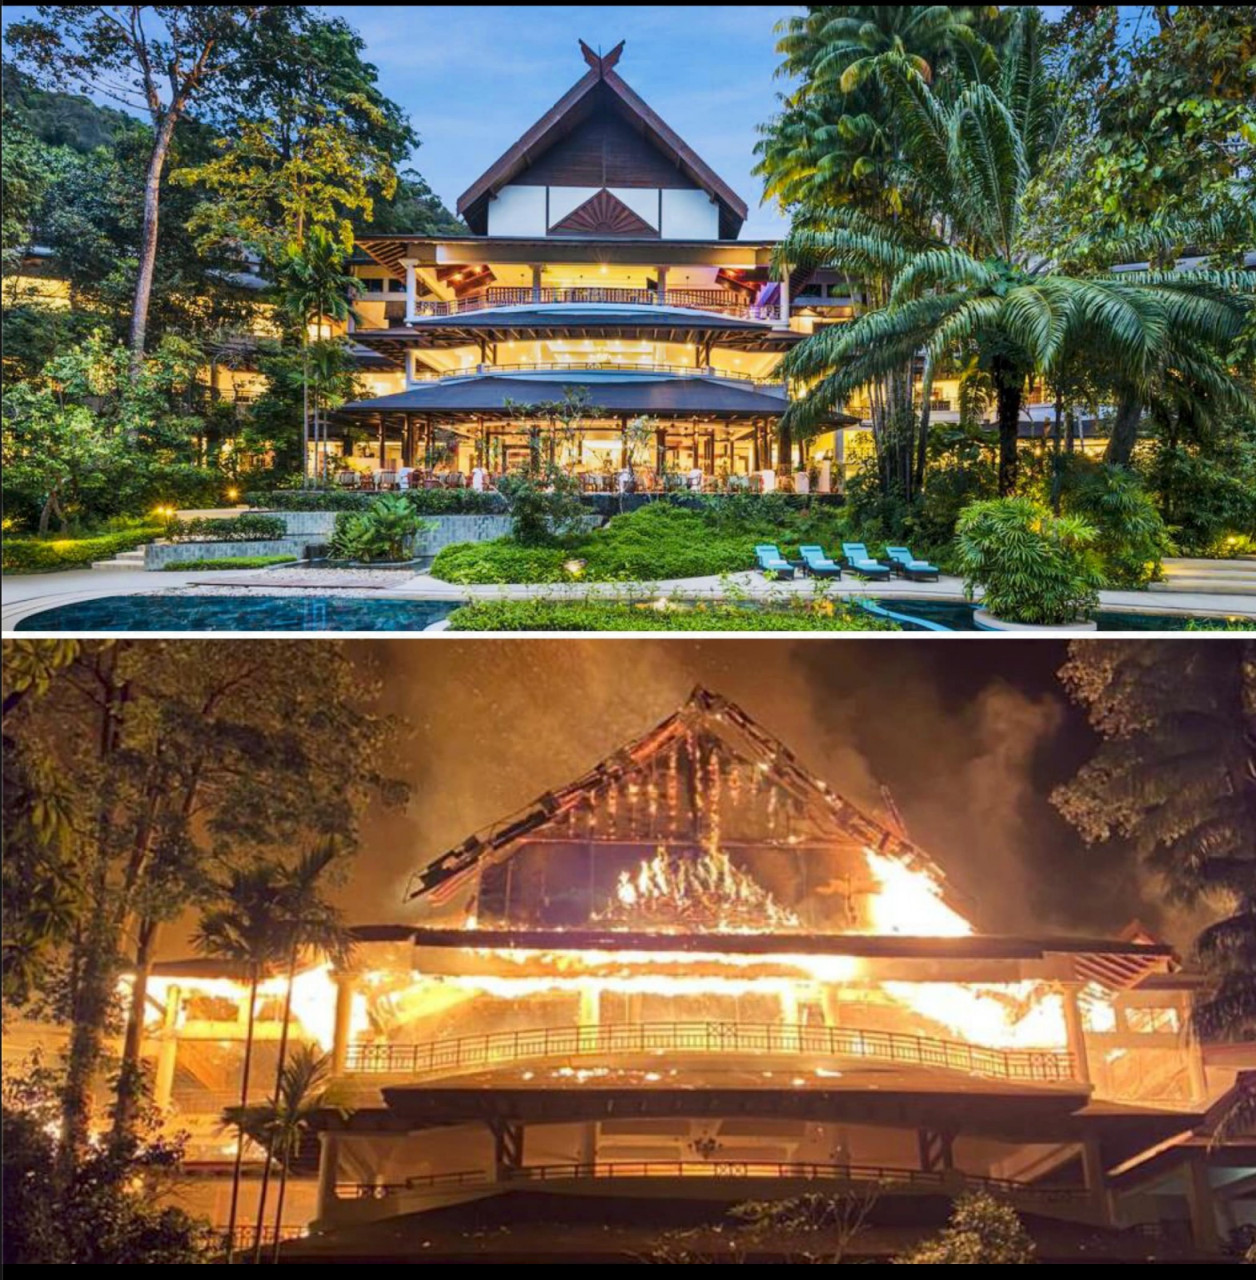 A before-and-after picture of the Andaman Resort in Langkawi, which caught fire last night and has firefighters still taming the blaze. – David Loh pic, January 13, 2021